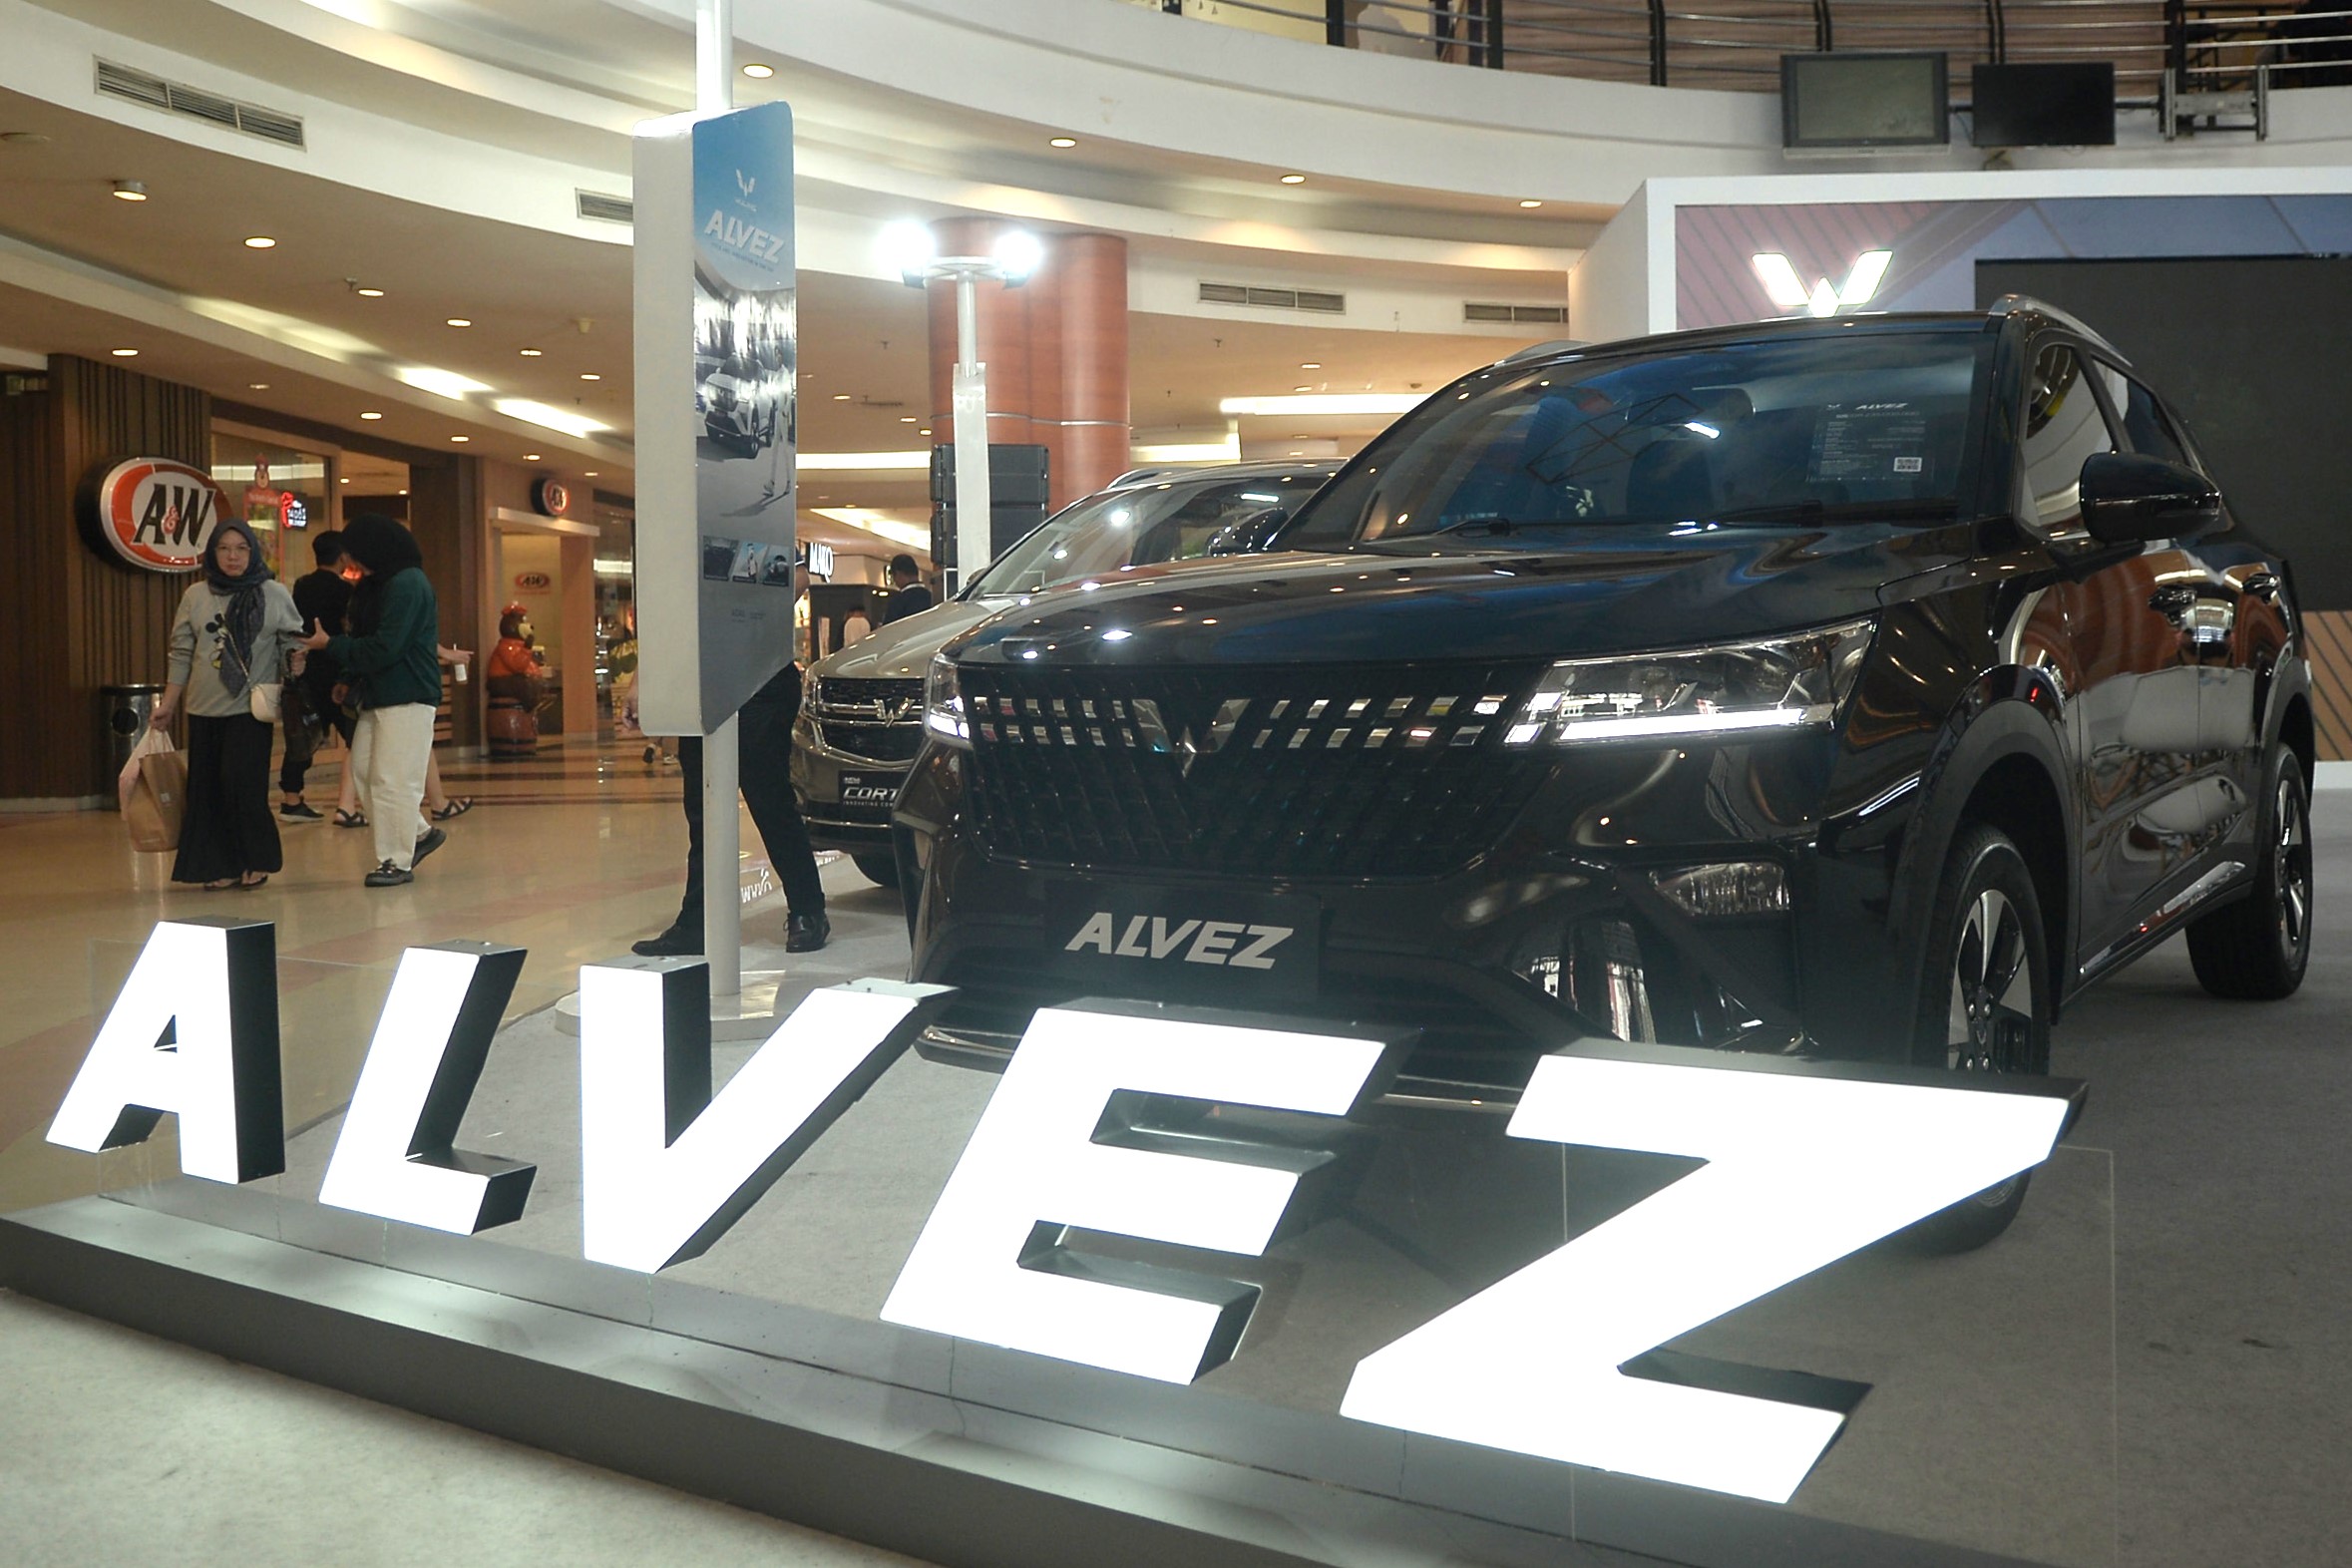 Image Wuling Alvez ‘Style & Innovation in One SUV’ Officially Marketed in Manado